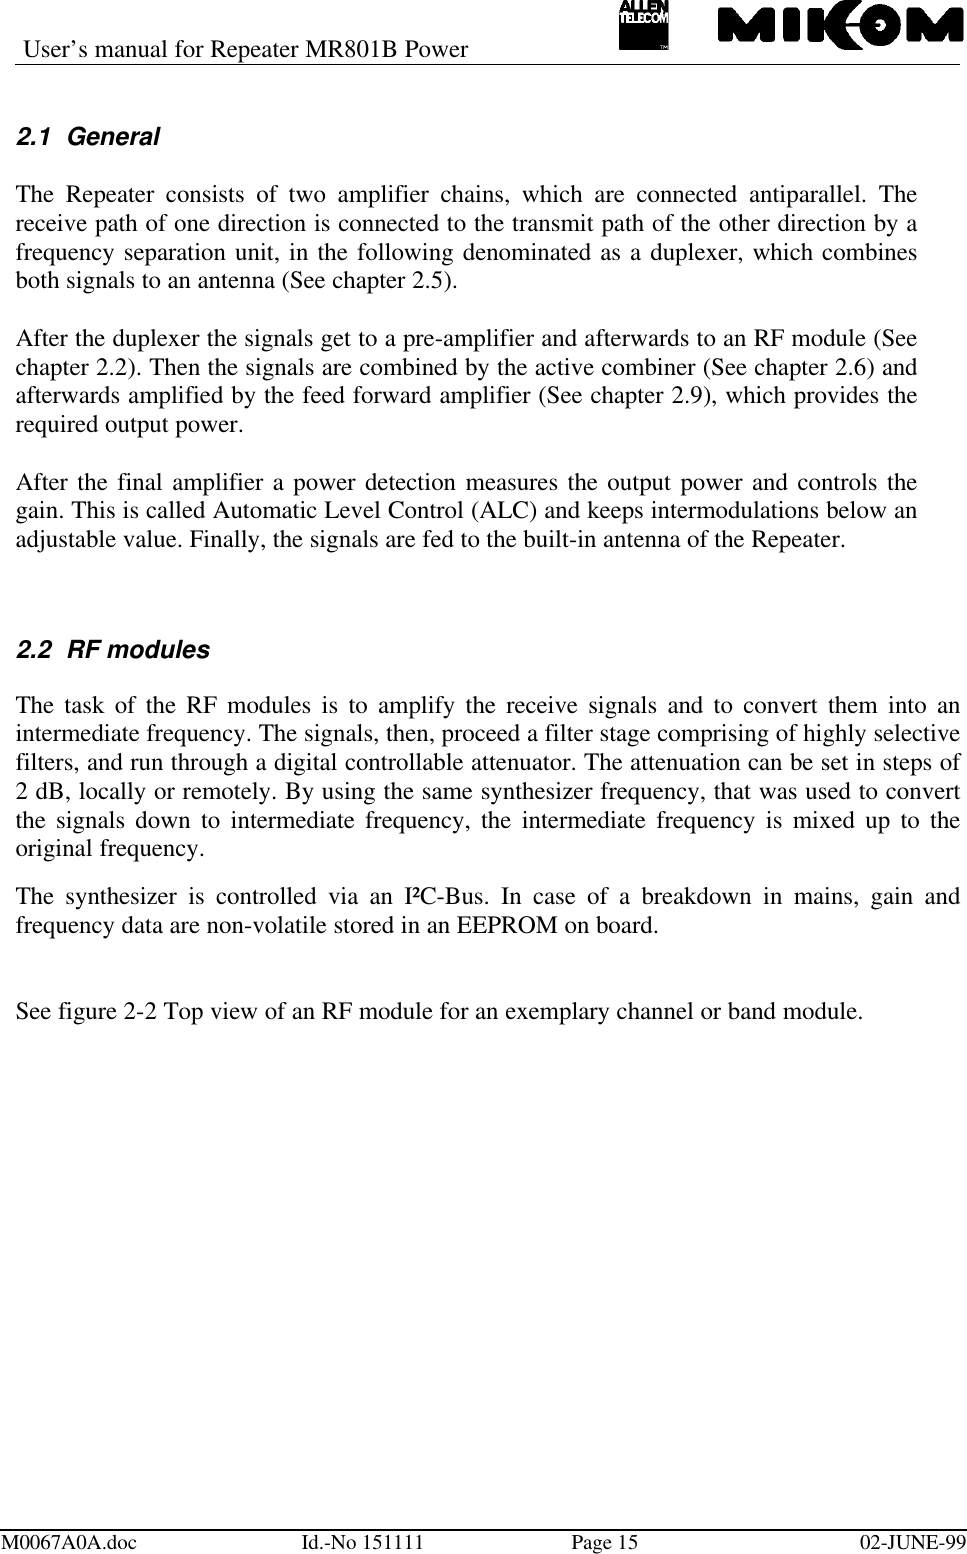 User’s manual for Repeater MR801B PowerM0067A0A.doc Id.-No 151111 Page 15 02-JUNE-992.1 GeneralThe Repeater consists of two amplifier chains, which are connected antiparallel. Thereceive path of one direction is connected to the transmit path of the other direction by afrequency separation unit, in the following denominated as a duplexer, which combinesboth signals to an antenna (See chapter 2.5).After the duplexer the signals get to a pre-amplifier and afterwards to an RF module (Seechapter 2.2). Then the signals are combined by the active combiner (See chapter 2.6) andafterwards amplified by the feed forward amplifier (See chapter 2.9), which provides therequired output power.After the final amplifier a power detection measures the output power and controls thegain. This is called Automatic Level Control (ALC) and keeps intermodulations below anadjustable value. Finally, the signals are fed to the built-in antenna of the Repeater.2.2 RF modulesThe task of the RF modules is to amplify the receive signals and to convert them into anintermediate frequency. The signals, then, proceed a filter stage comprising of highly selectivefilters, and run through a digital controllable attenuator. The attenuation can be set in steps of2 dB, locally or remotely. By using the same synthesizer frequency, that was used to convertthe signals down to intermediate frequency, the intermediate frequency is mixed up to theoriginal frequency.The synthesizer is controlled via an I²C-Bus. In case of a breakdown in mains, gain andfrequency data are non-volatile stored in an EEPROM on board.See figure 2-2 Top view of an RF module for an exemplary channel or band module.